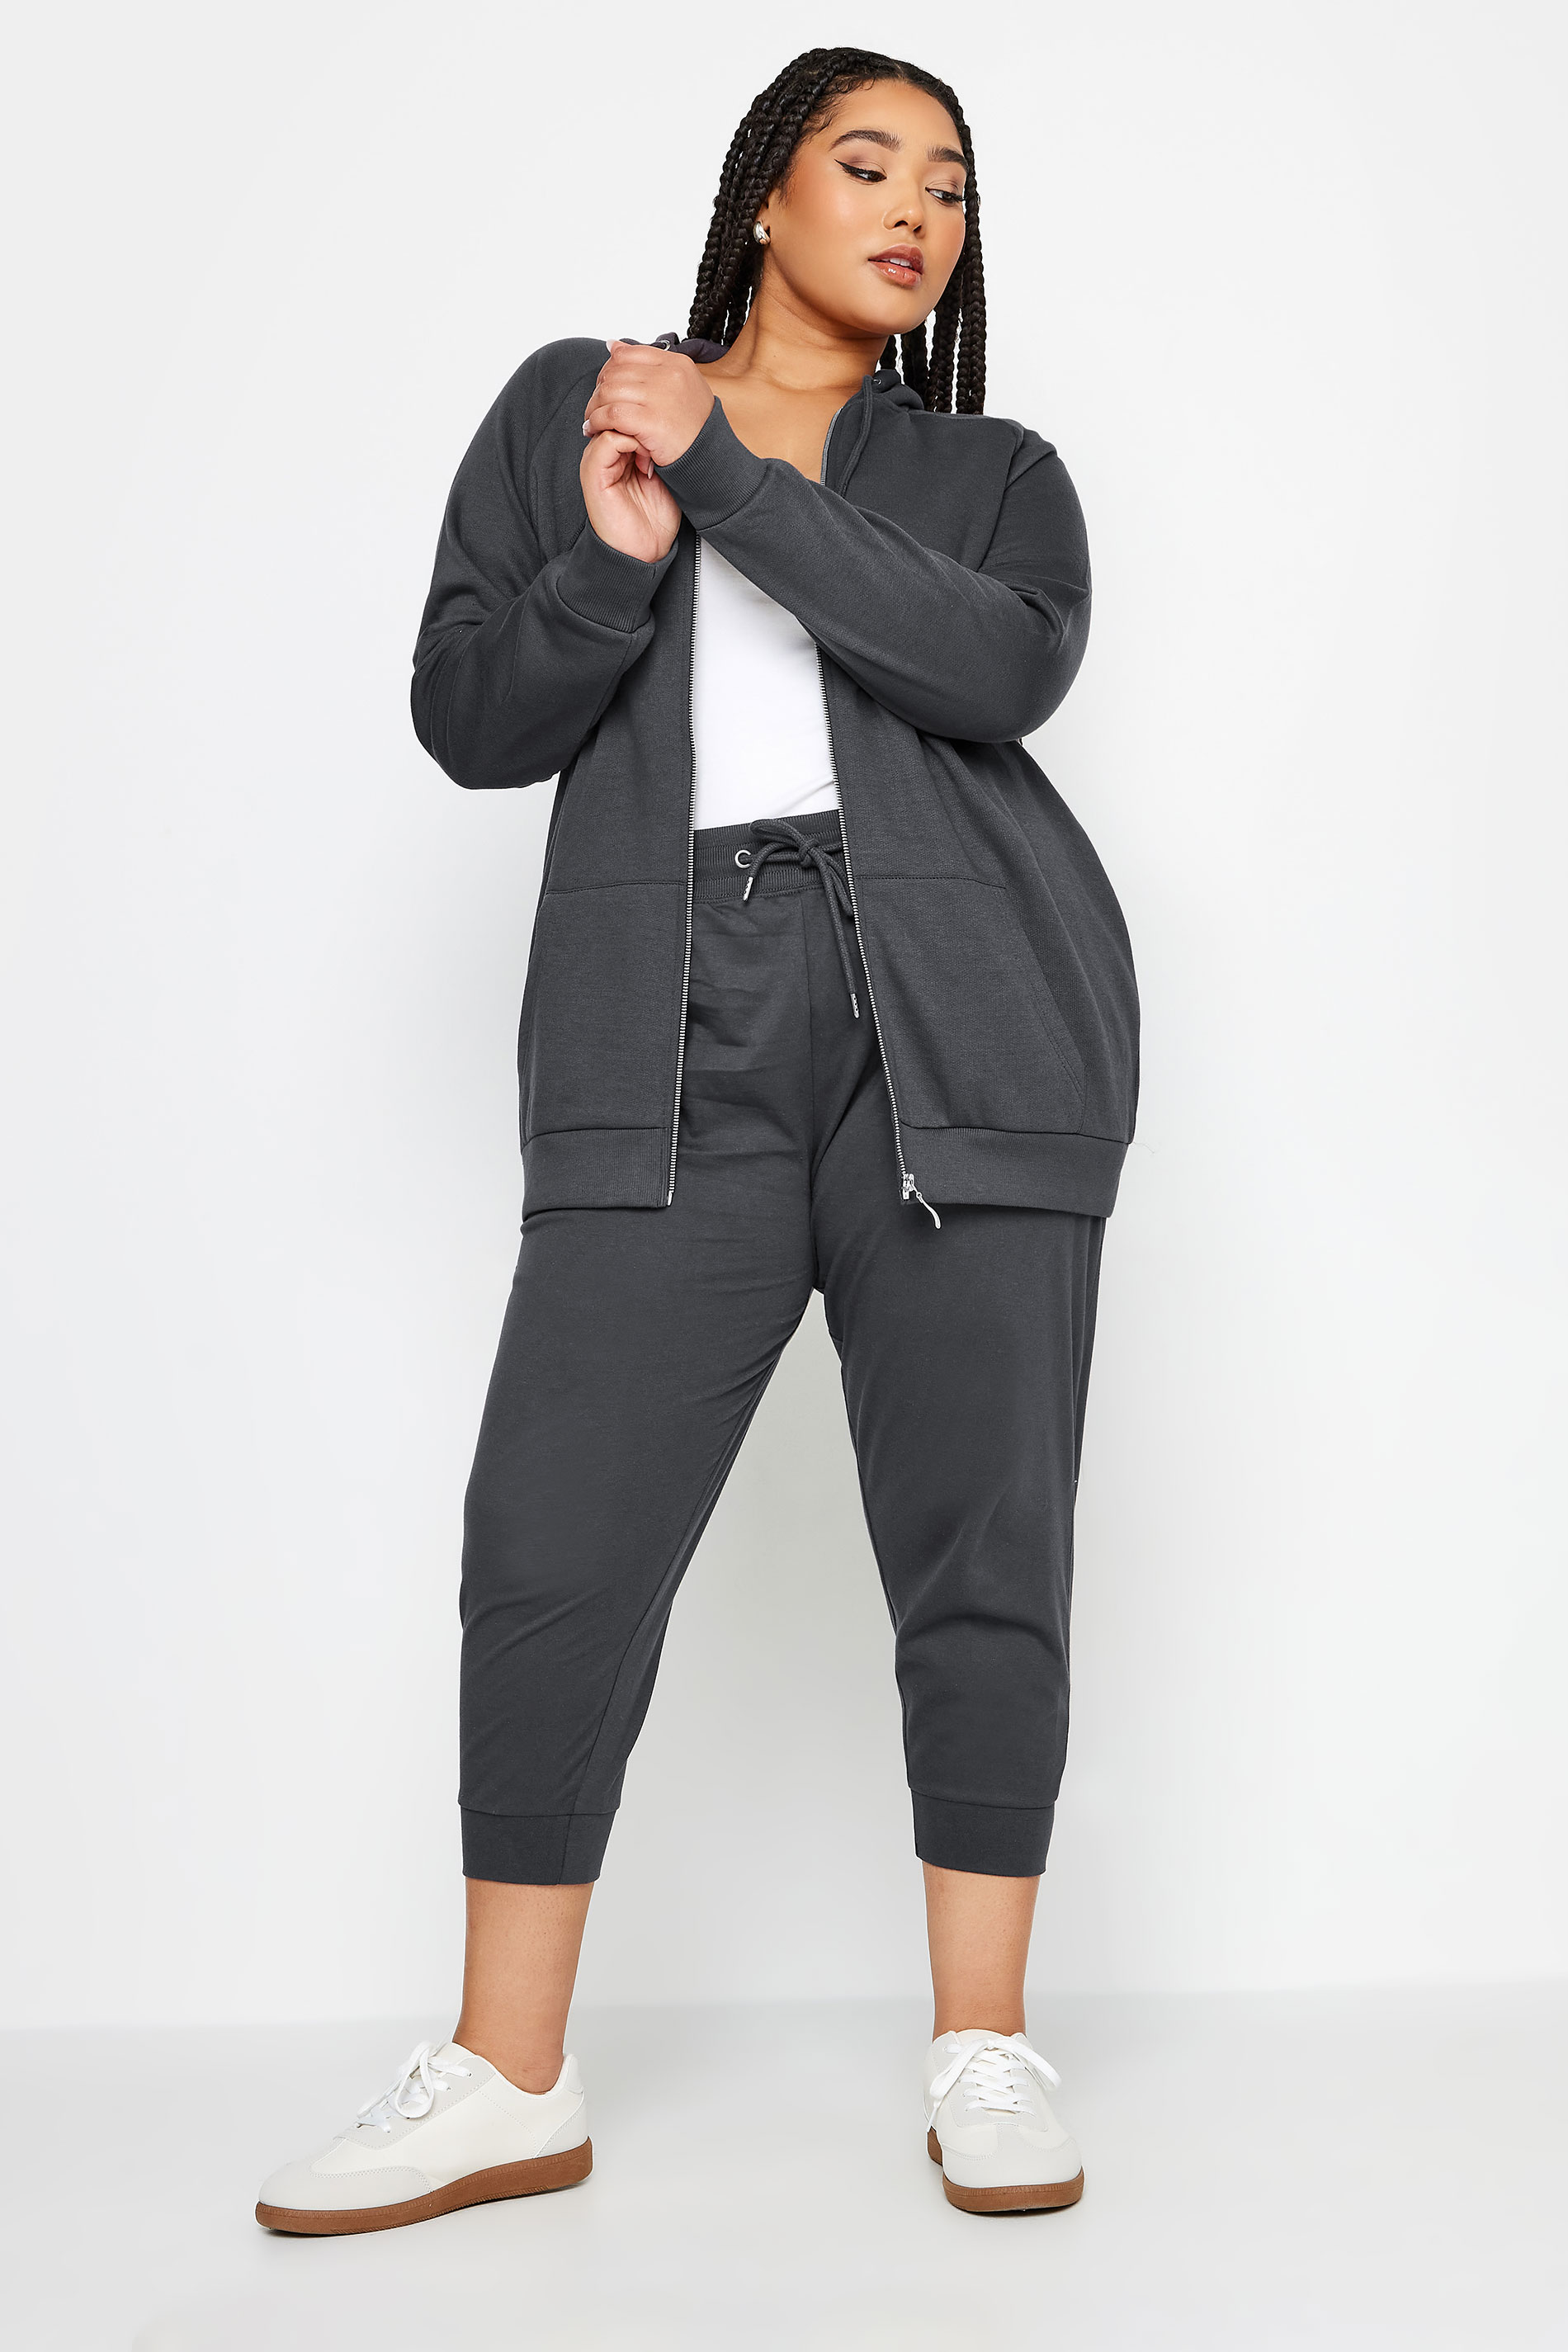 YOURS Plus Size Charcoal Grey Zip Through Hoodie | Yours Clothing 3